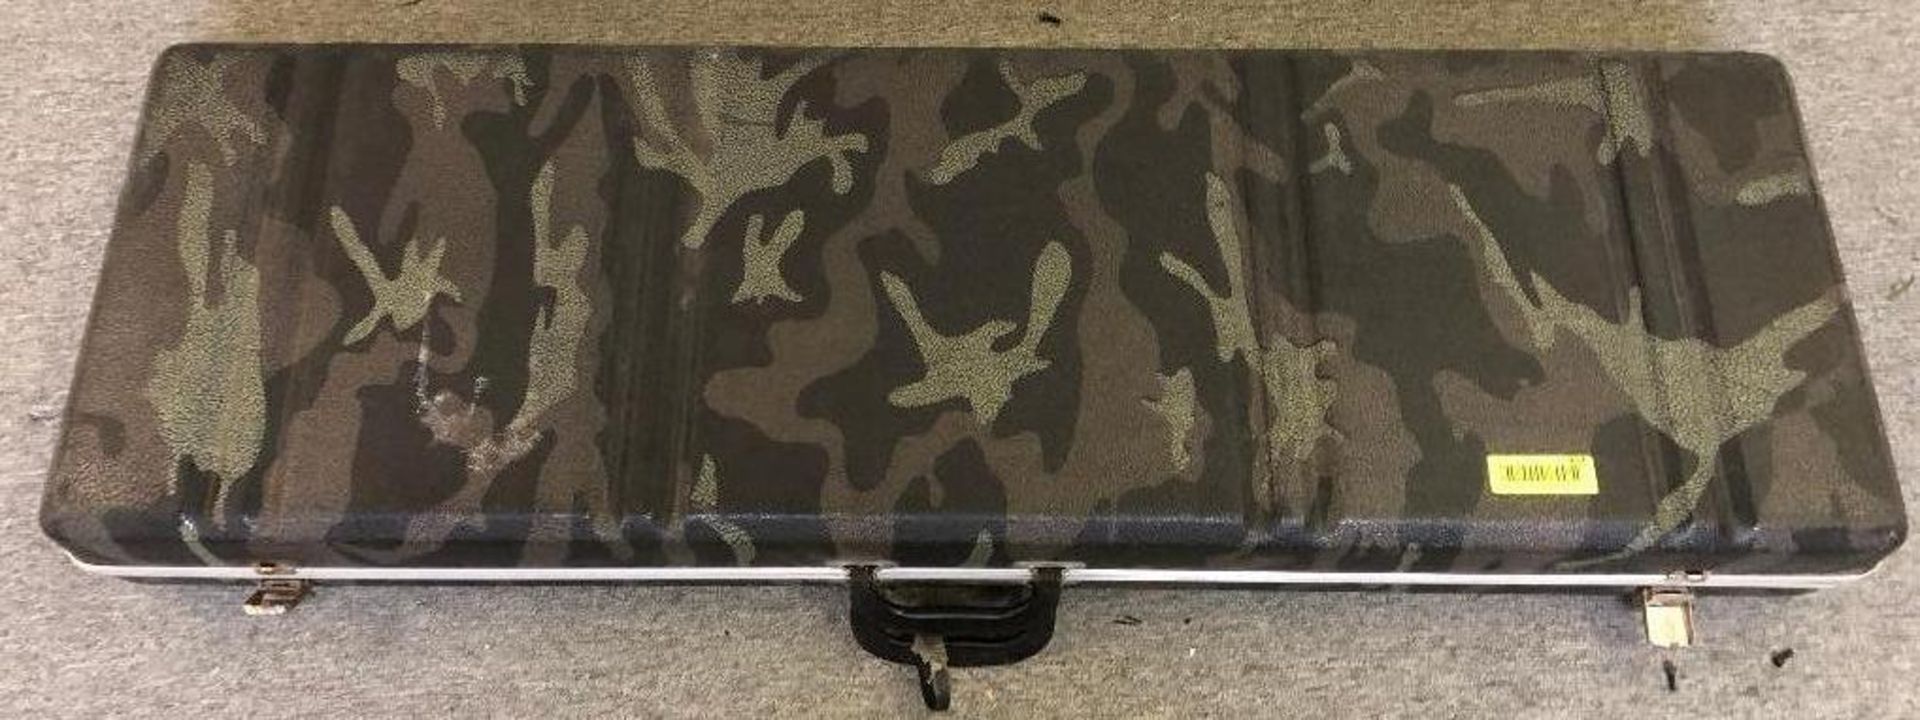 DESCRIPTION: HARD SHELL BOW CASE SIZE: INCHES: 46 X 15 LOCATION: SHIPPING OFFICE QTY: 1